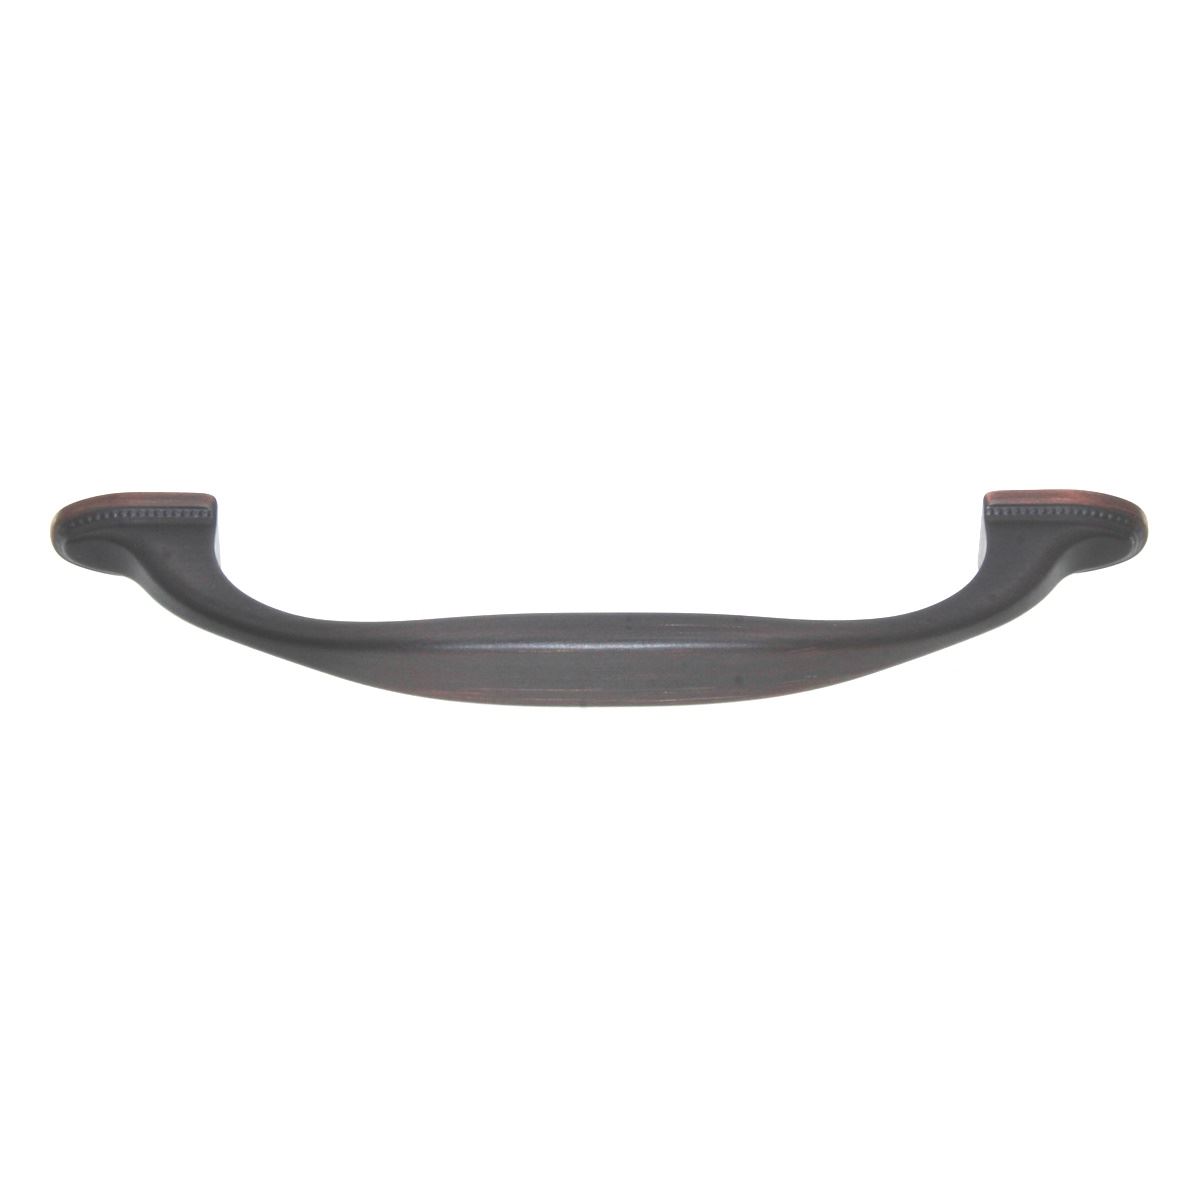 Amerock Atherly Cabinet Arch Pull 3 3/4" (96mm) Ctr Oil-Rubbed Bronze BP29295ORB